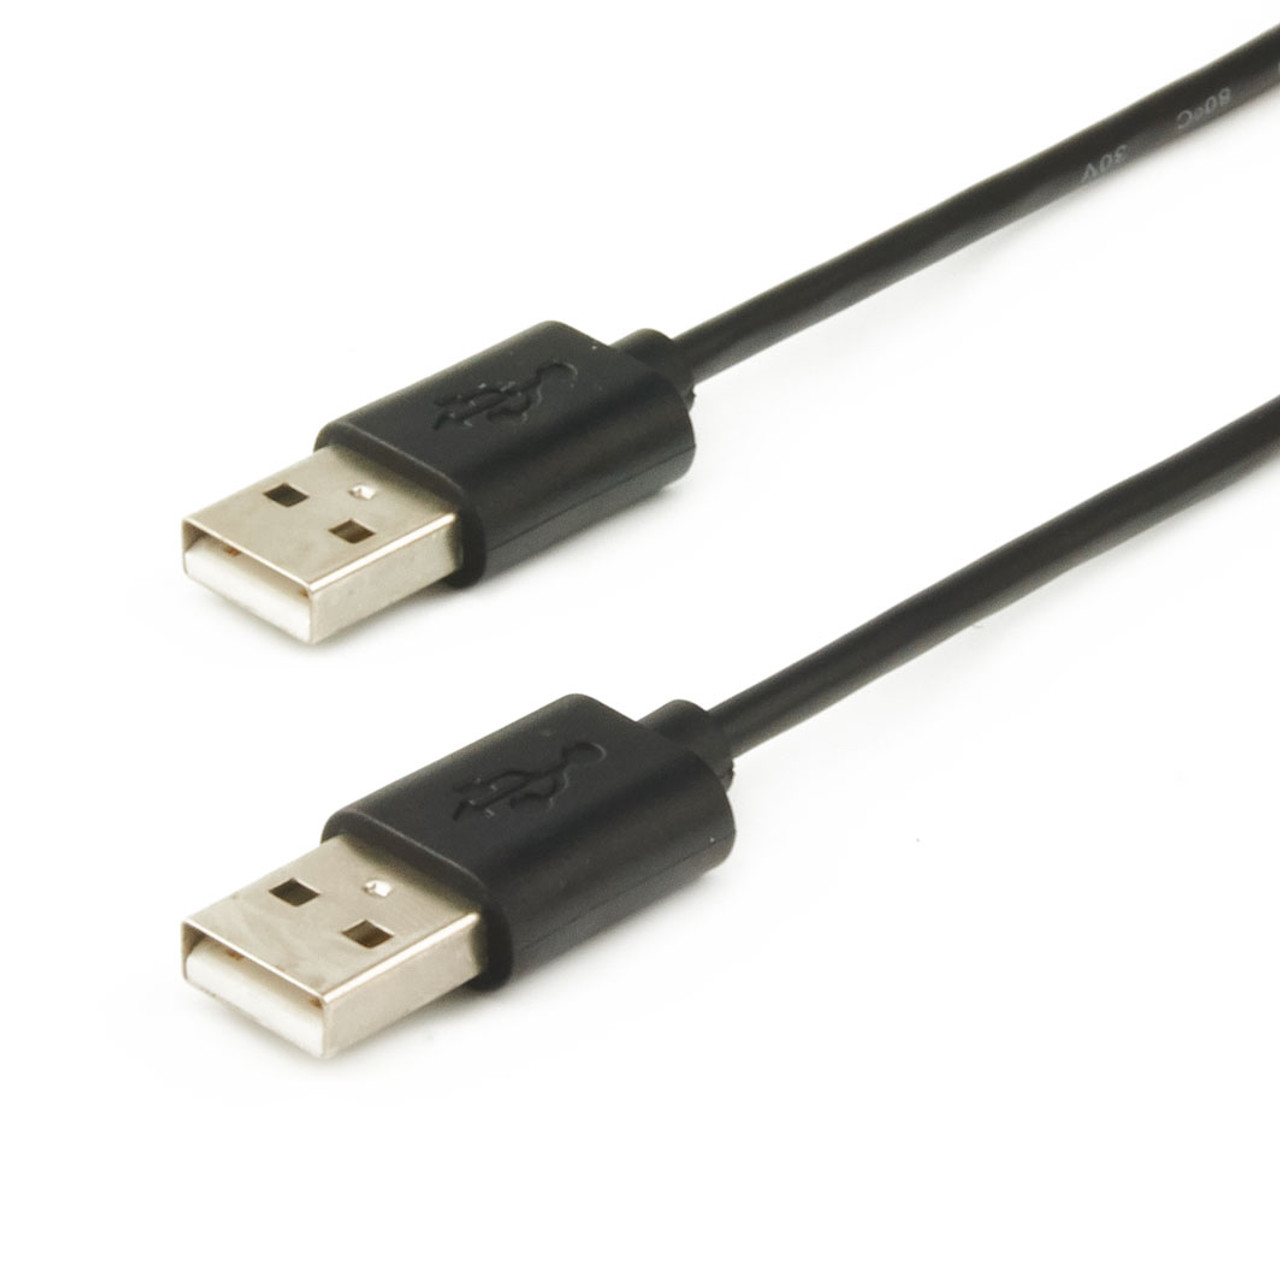 USB 2.0 A Male to A Male Cable 10ft